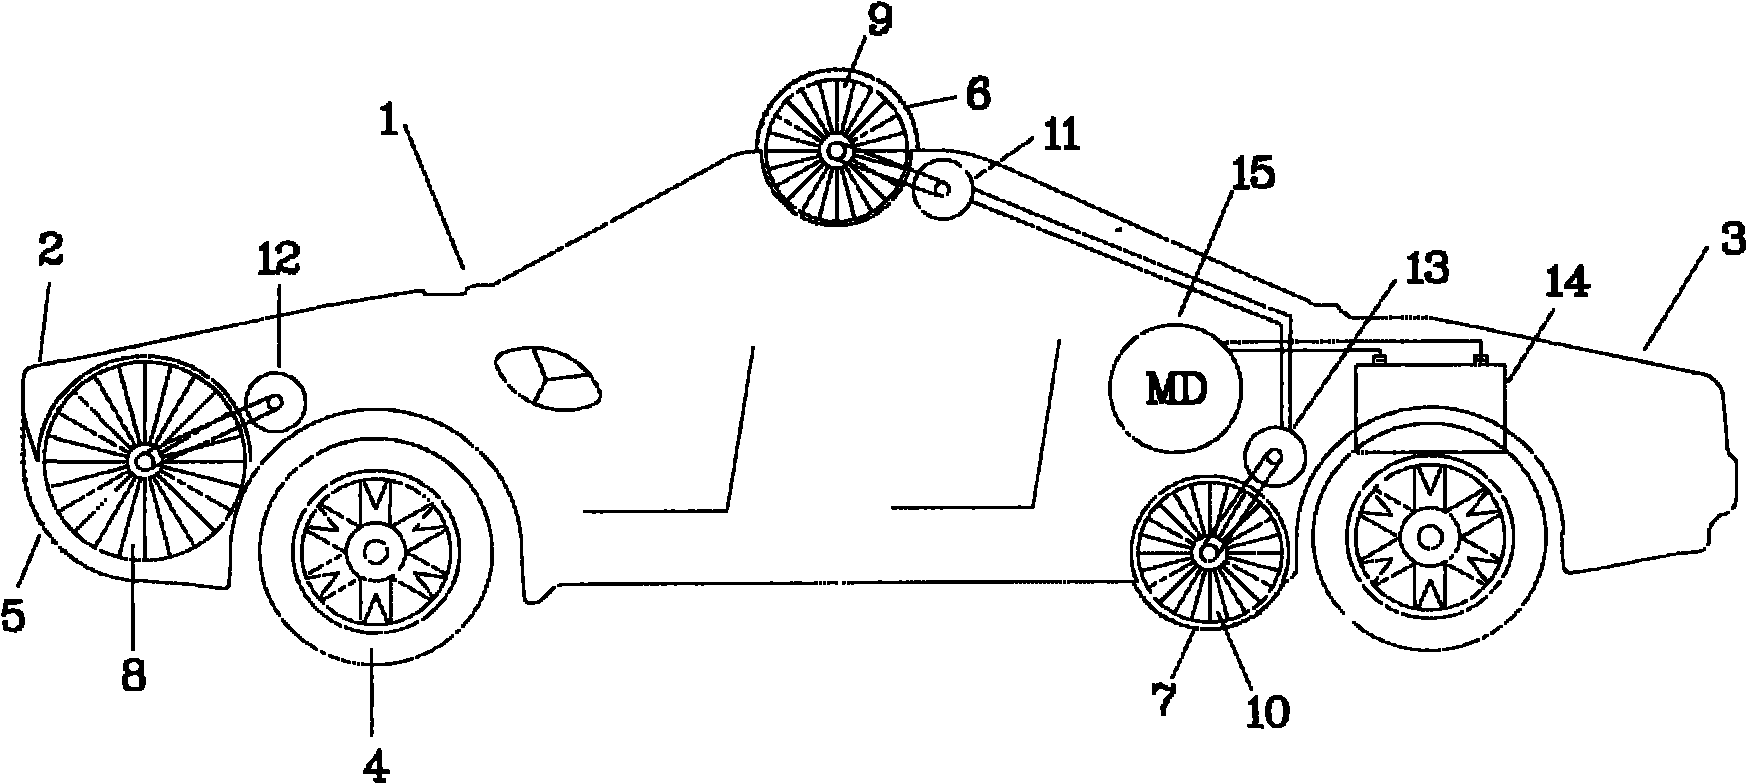 Vehicle-mounted wind-driven generator system